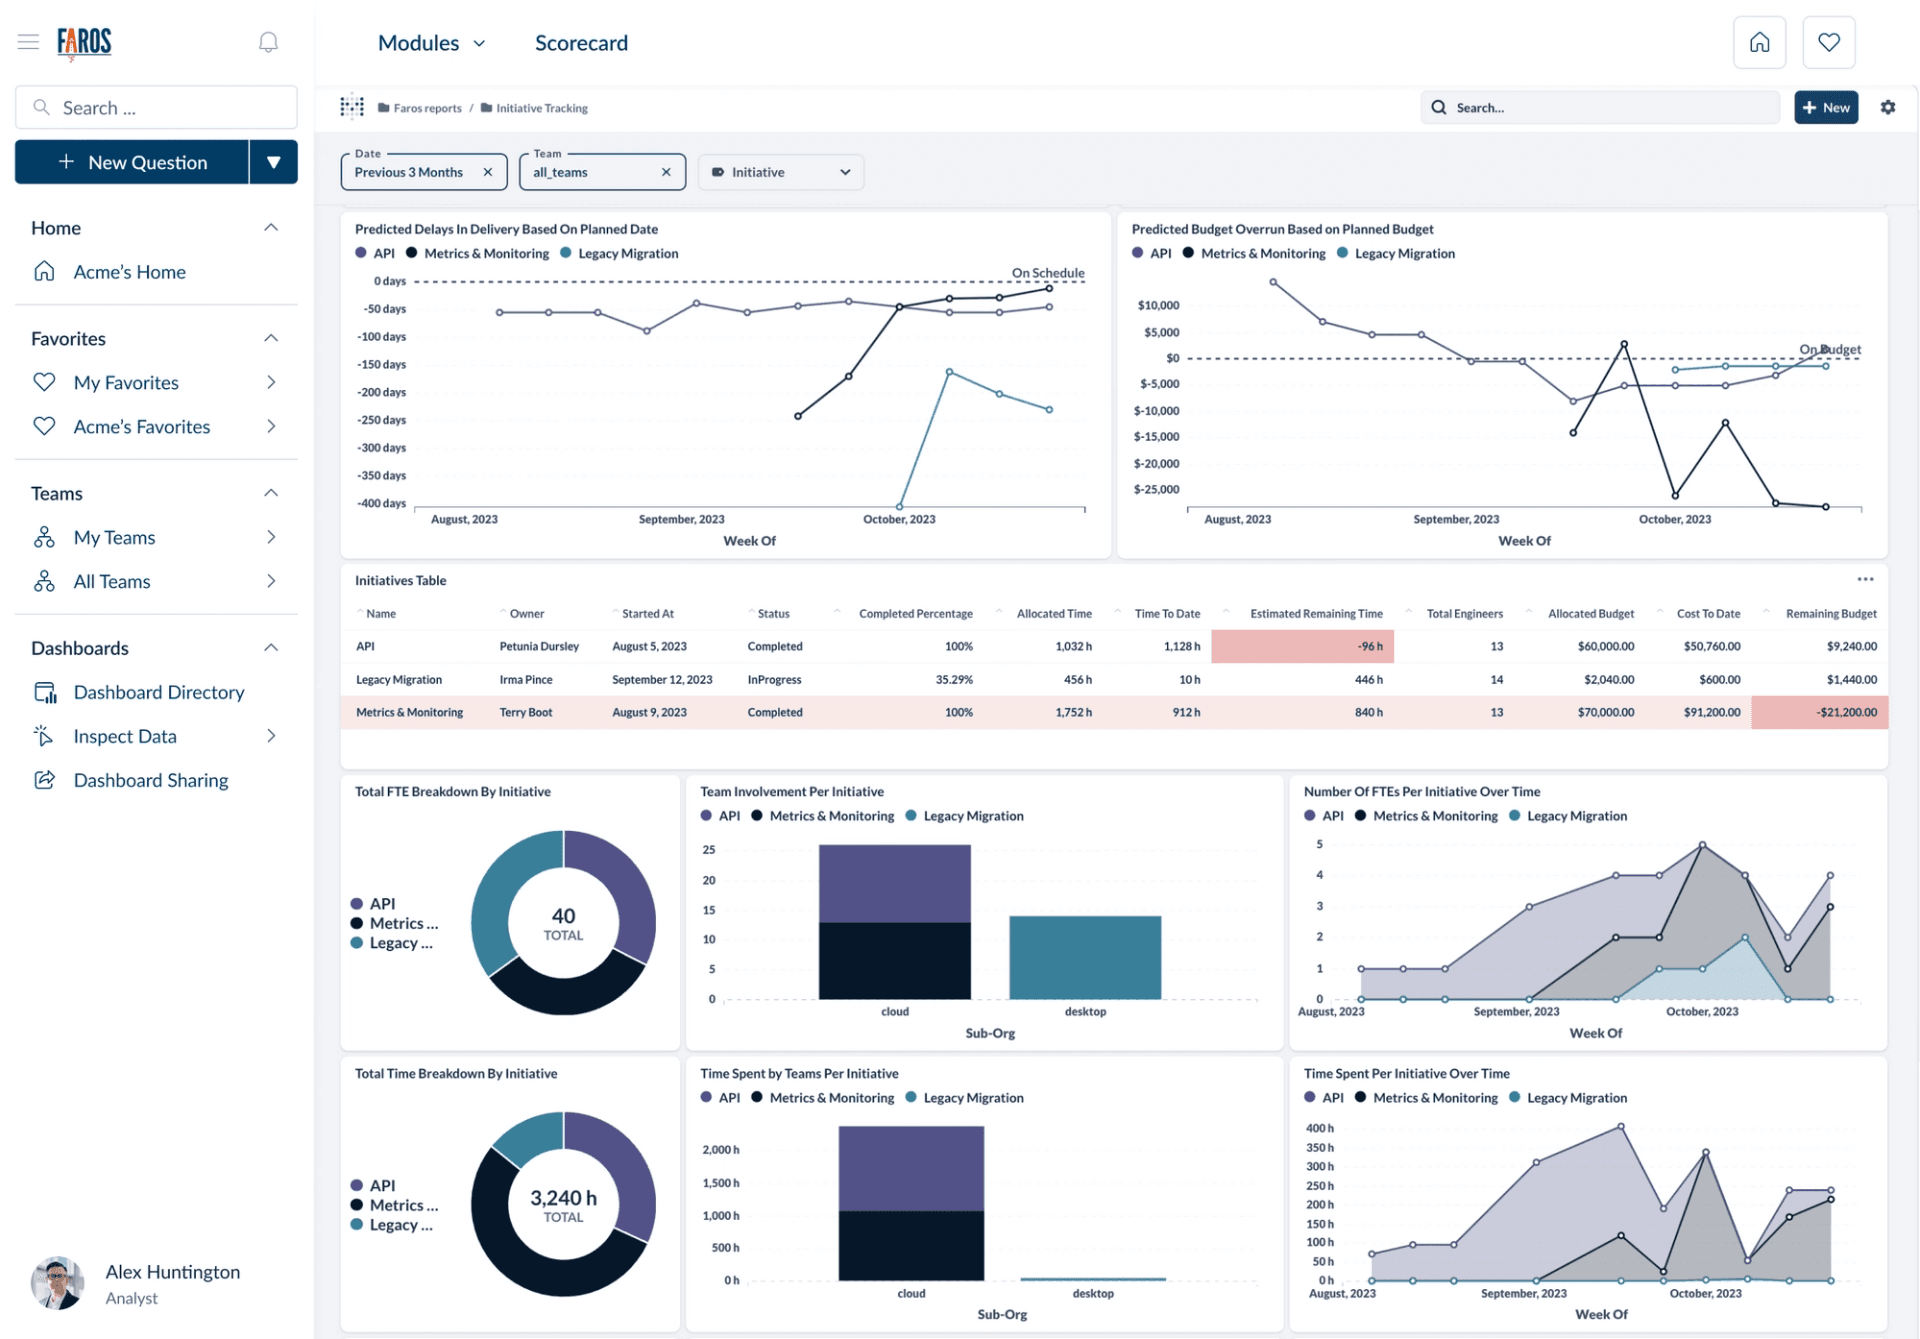 A screenshot of a Faros AI dashboard that shows predicted delays and cost overruns and how resources are utilized per initiative